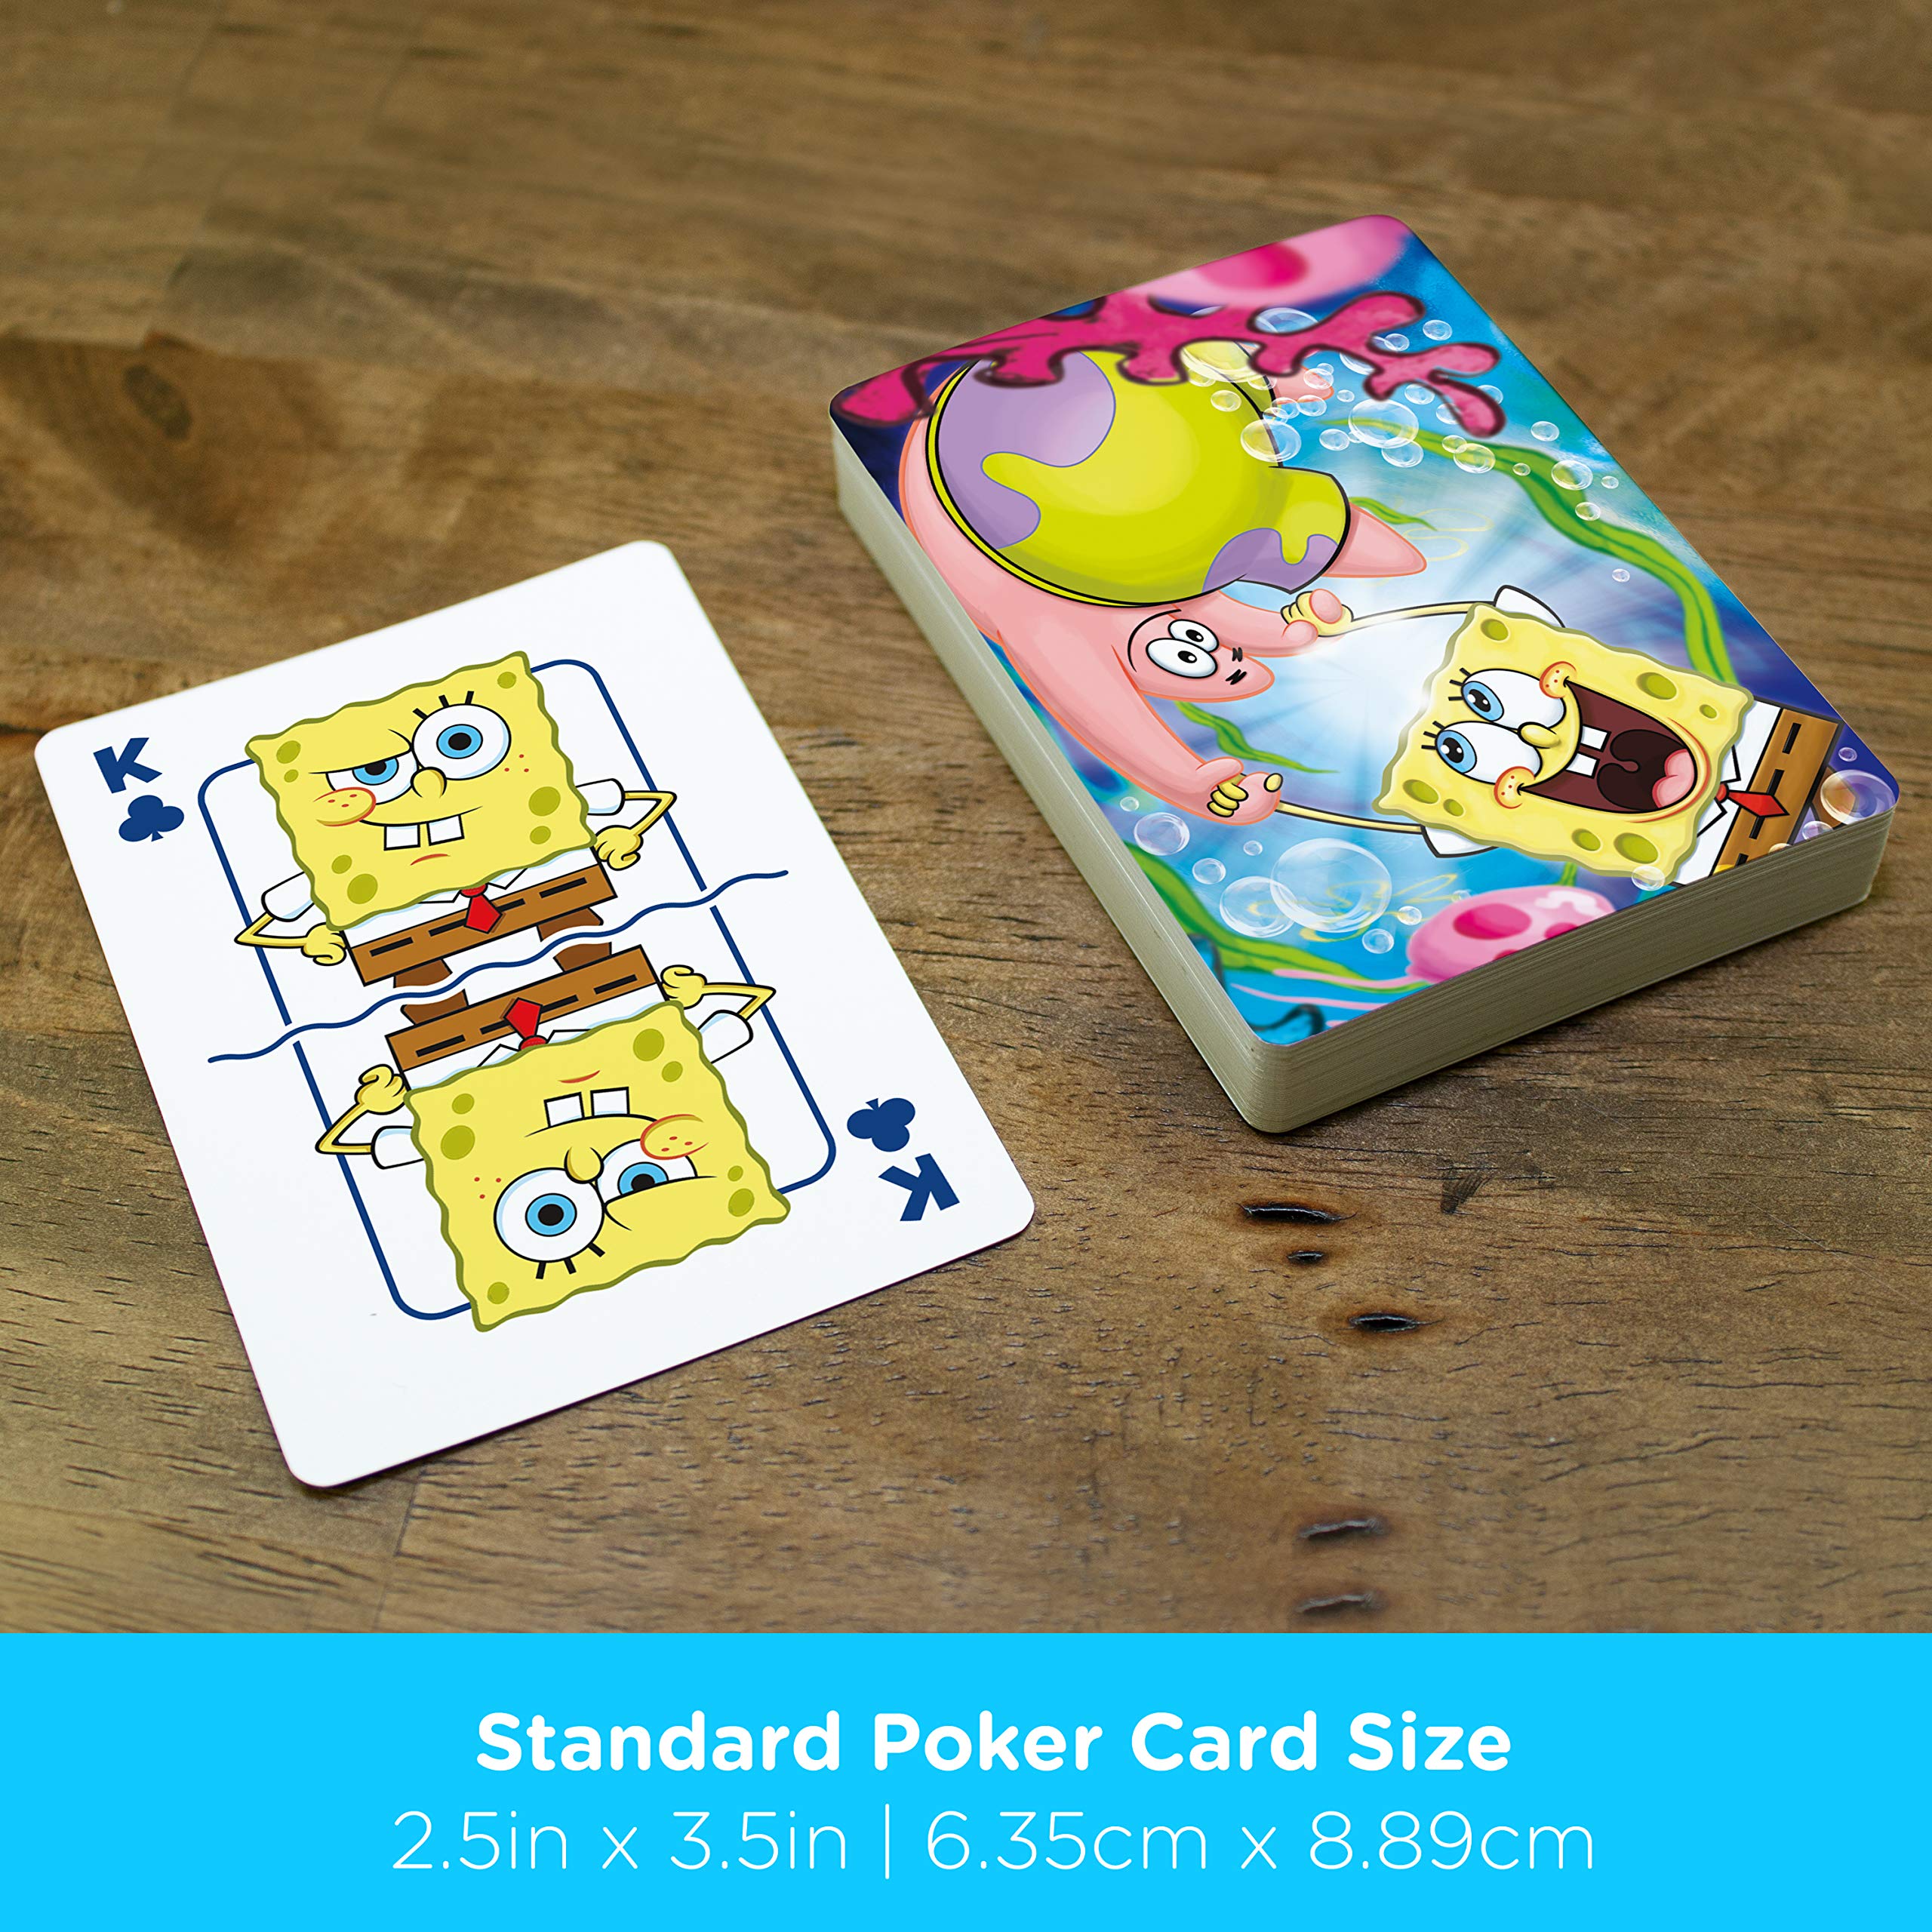 AQUARIUS SpongeBob Playing Cards - SpongeBob SquarePants Cast Deck of Cards for Your Favorite Card Games - Officially Licensed SpongeBob Merchandise & Collectibles